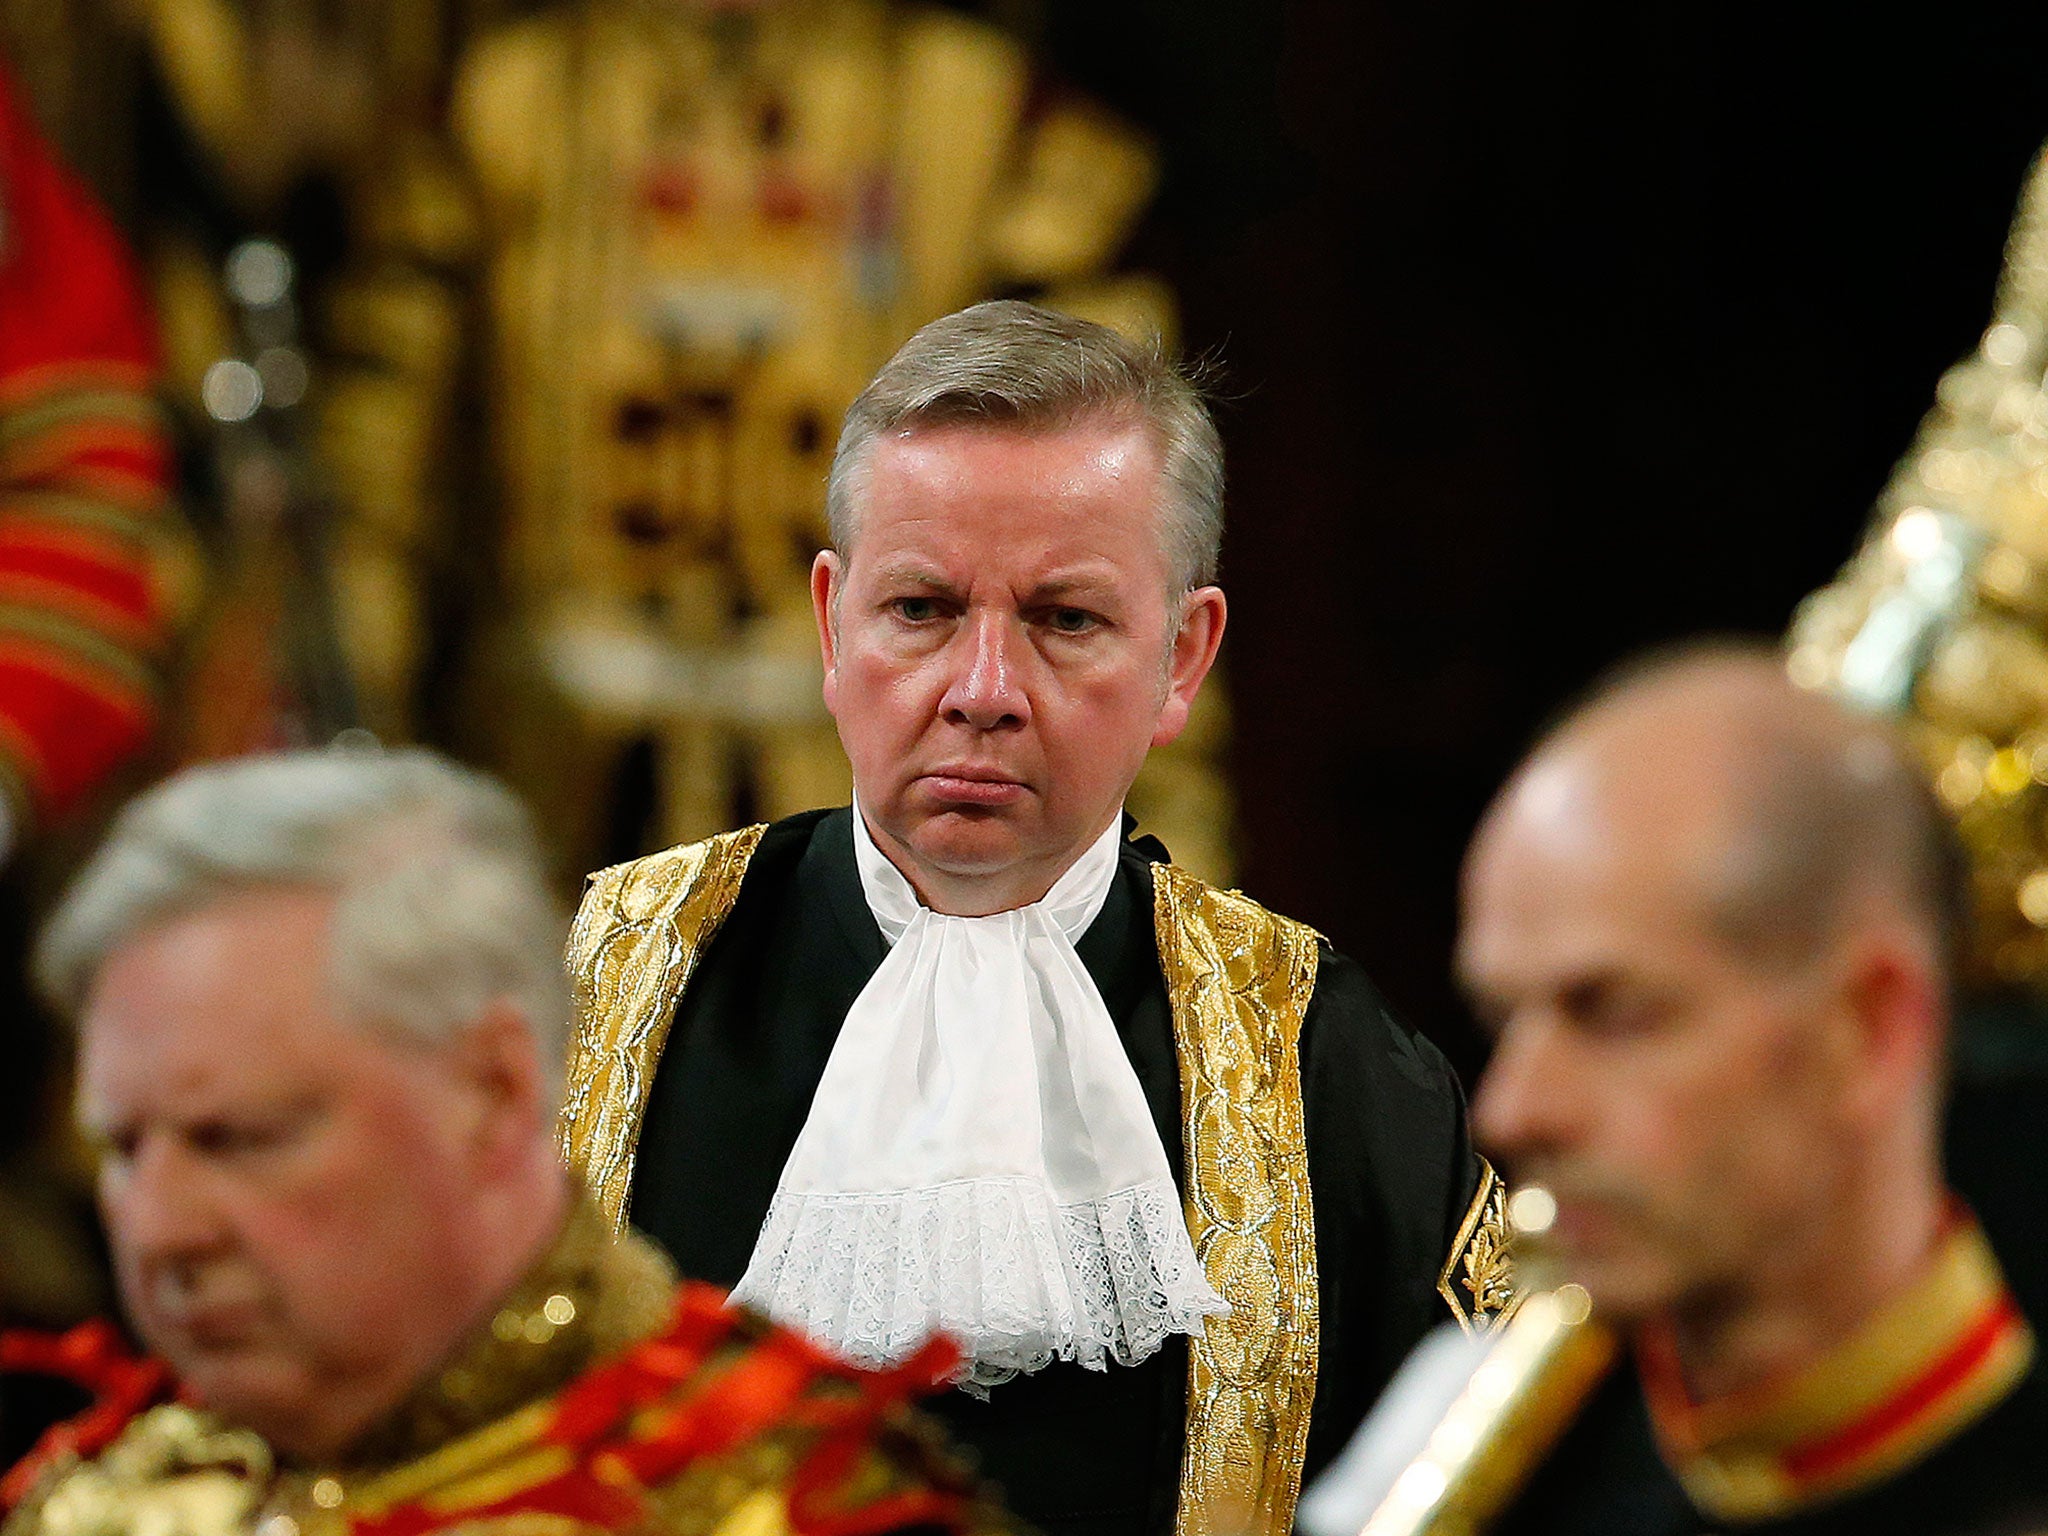 Government sources said that it became very quickly apparent when Michael Gove arrived in the Department of Justice that there was no hope of presenting a fully formed Bill of Rights in time to be debated in this first session of Parliament